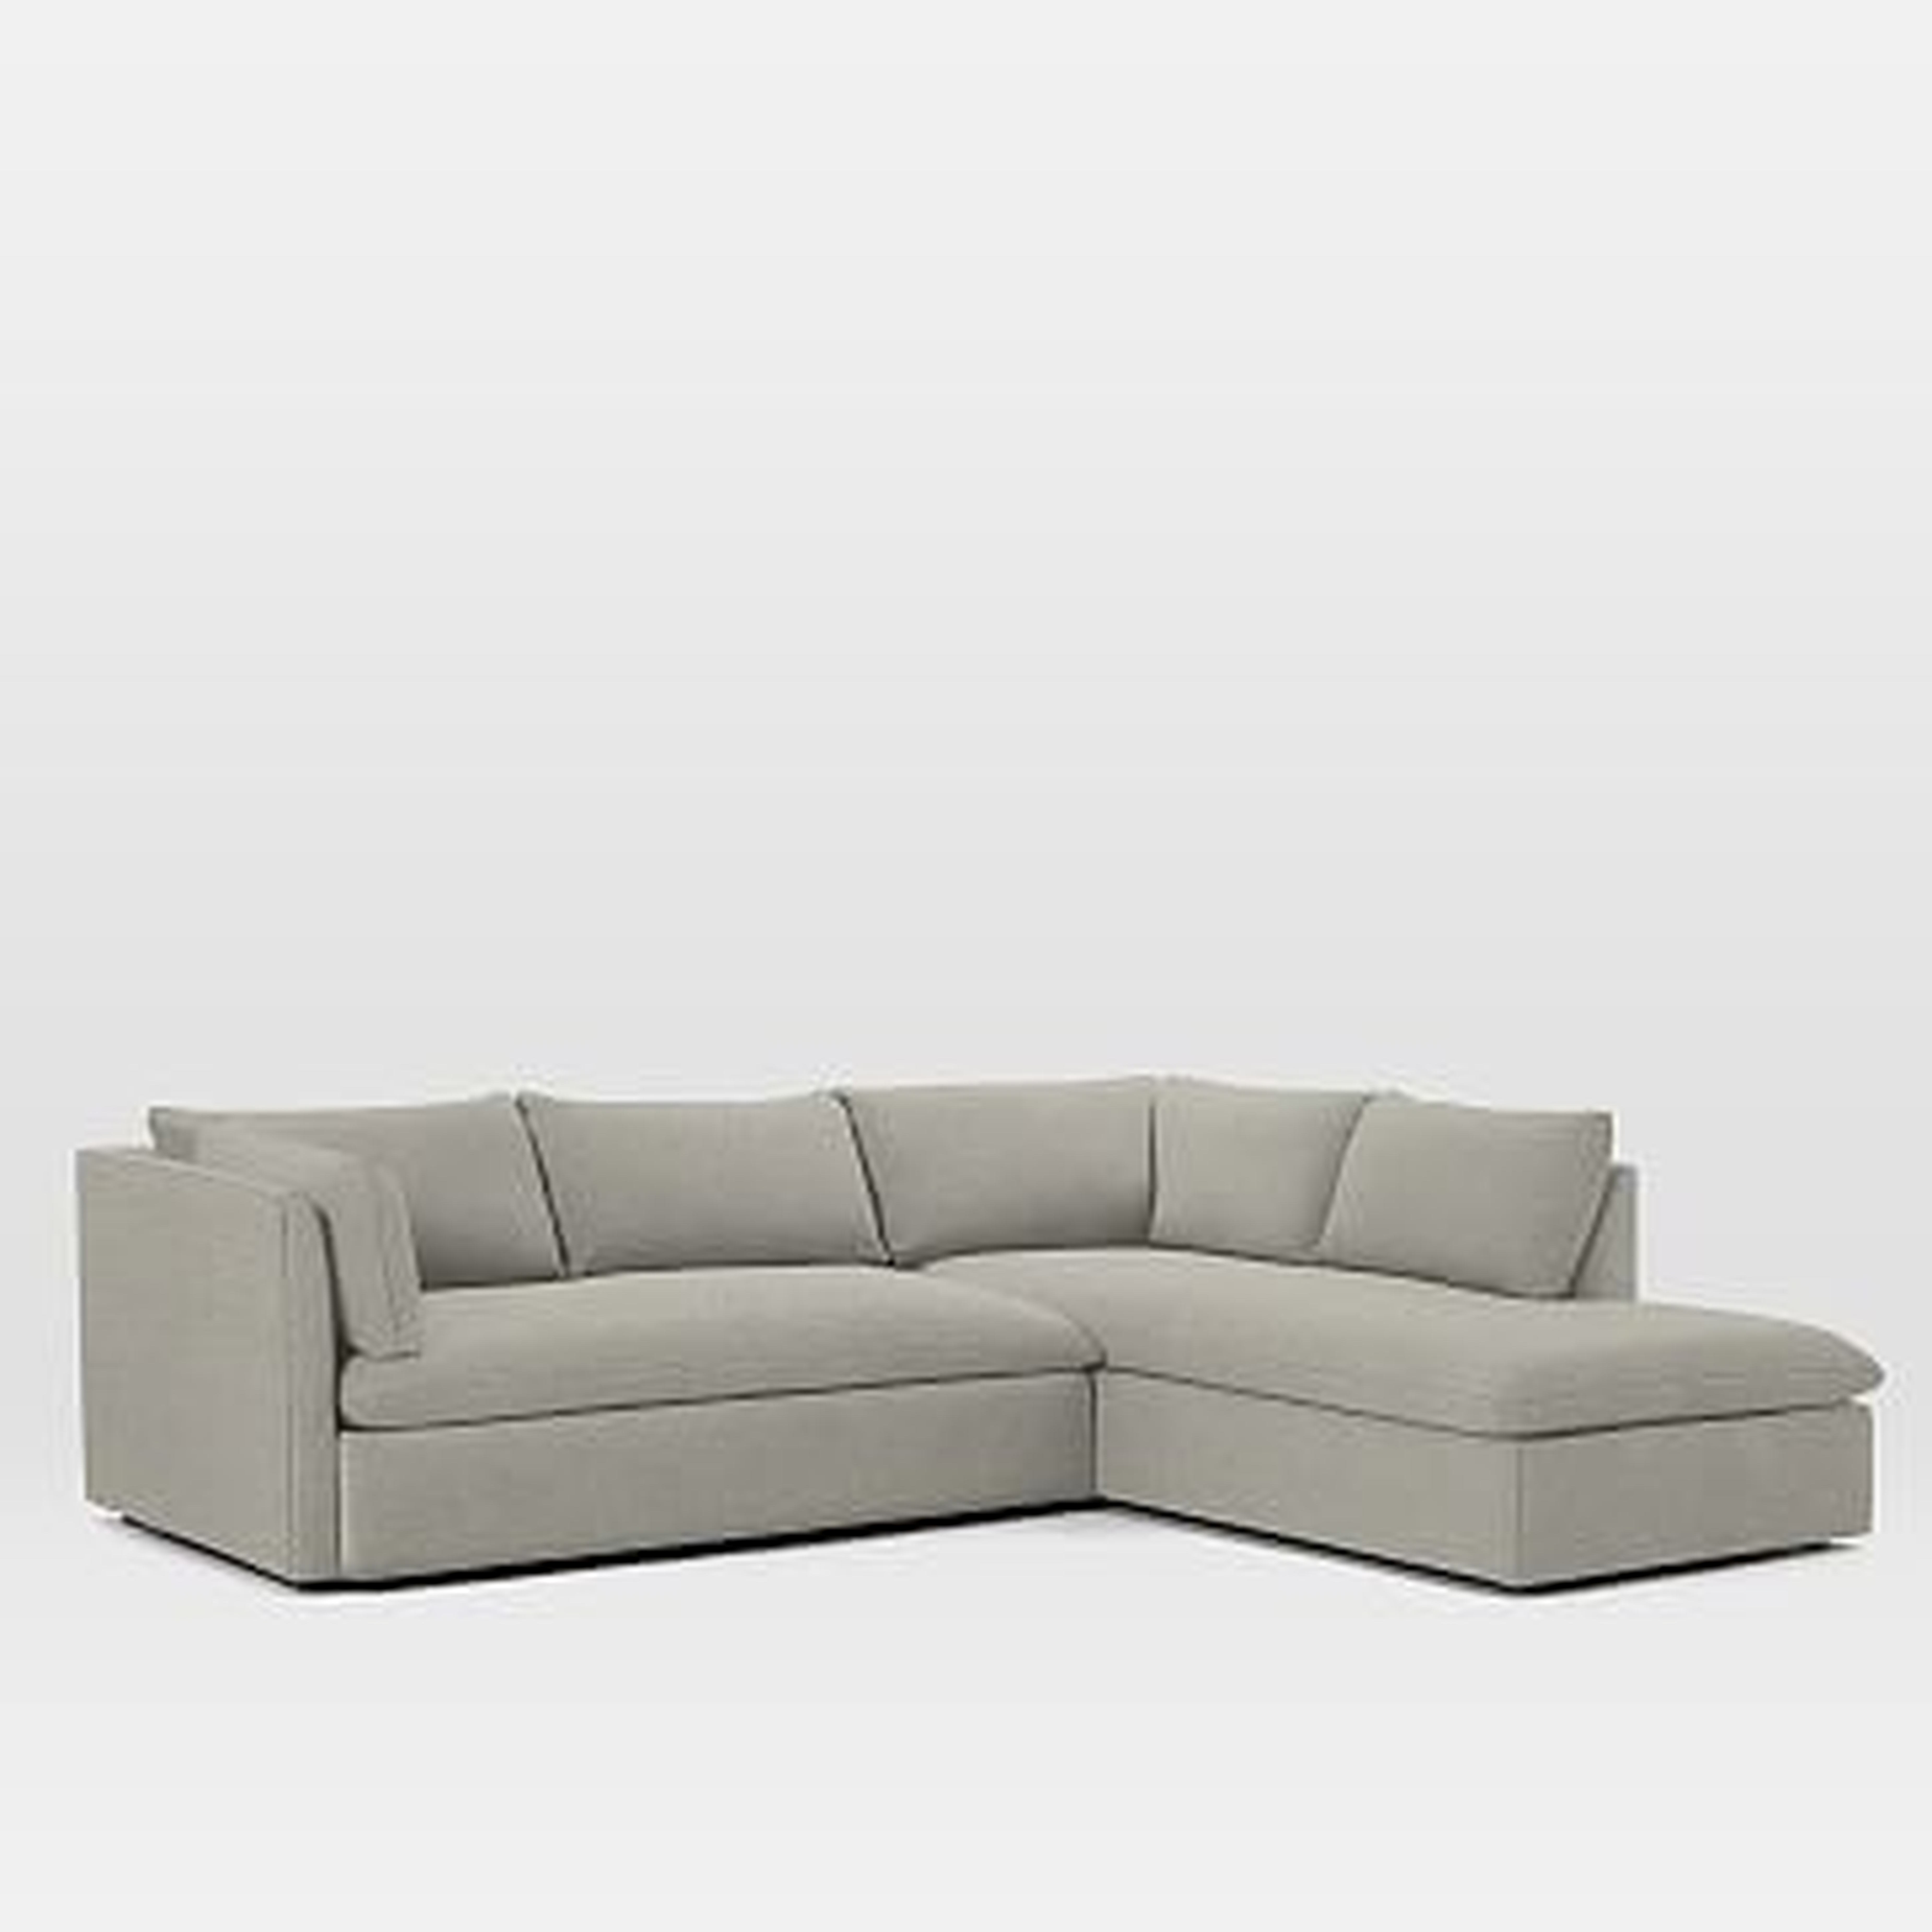 Shelter Sectional Set 01: LA Sofa, RA Bumper Chaise, Poly, Twill, Dove - West Elm